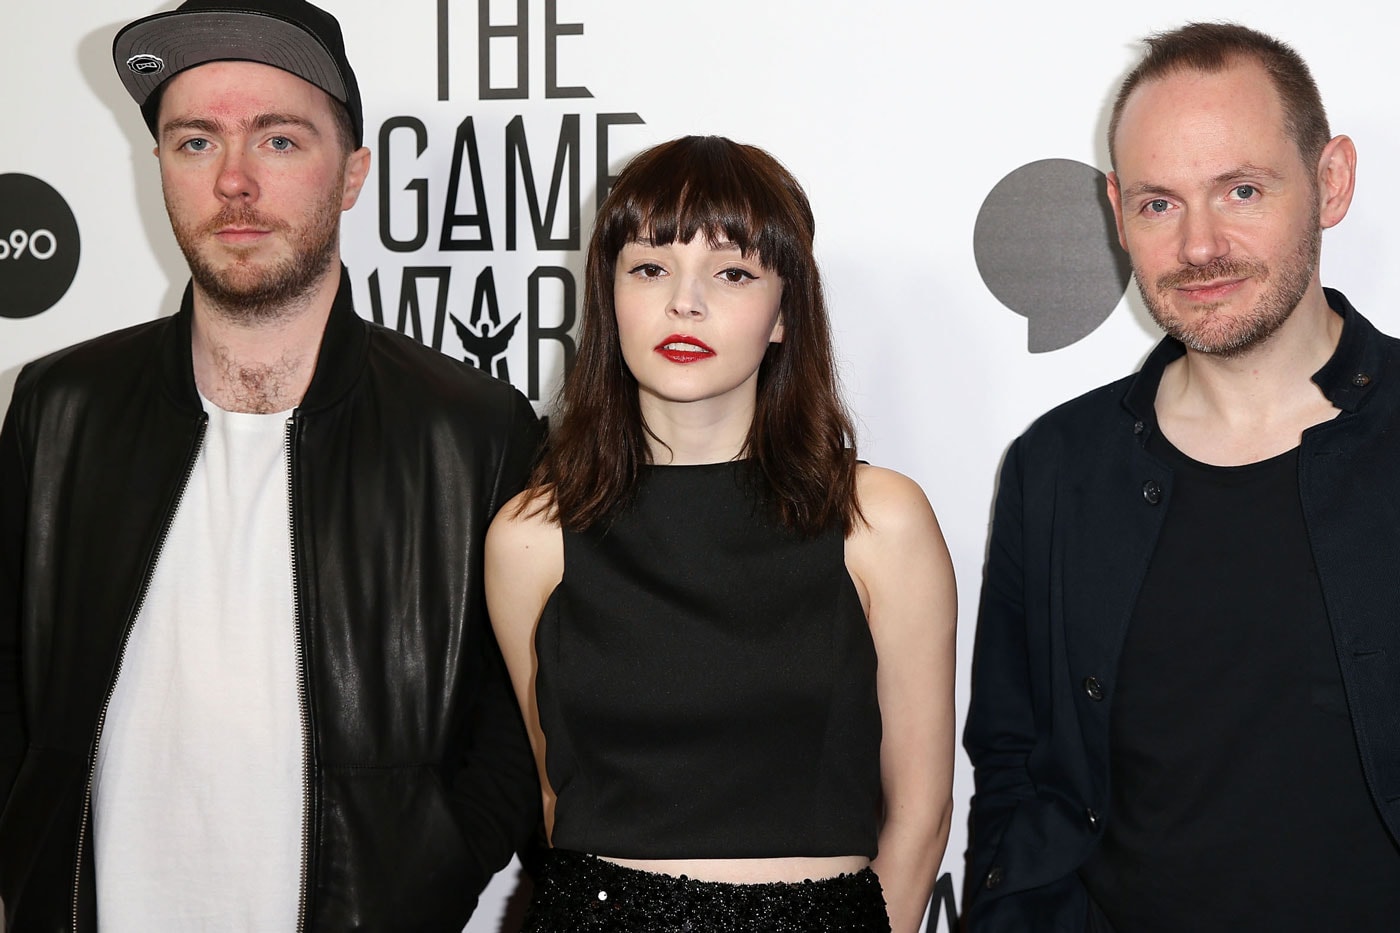 Watch Chvrches' Cover of Justin Bieber's "What Do You Mean?"